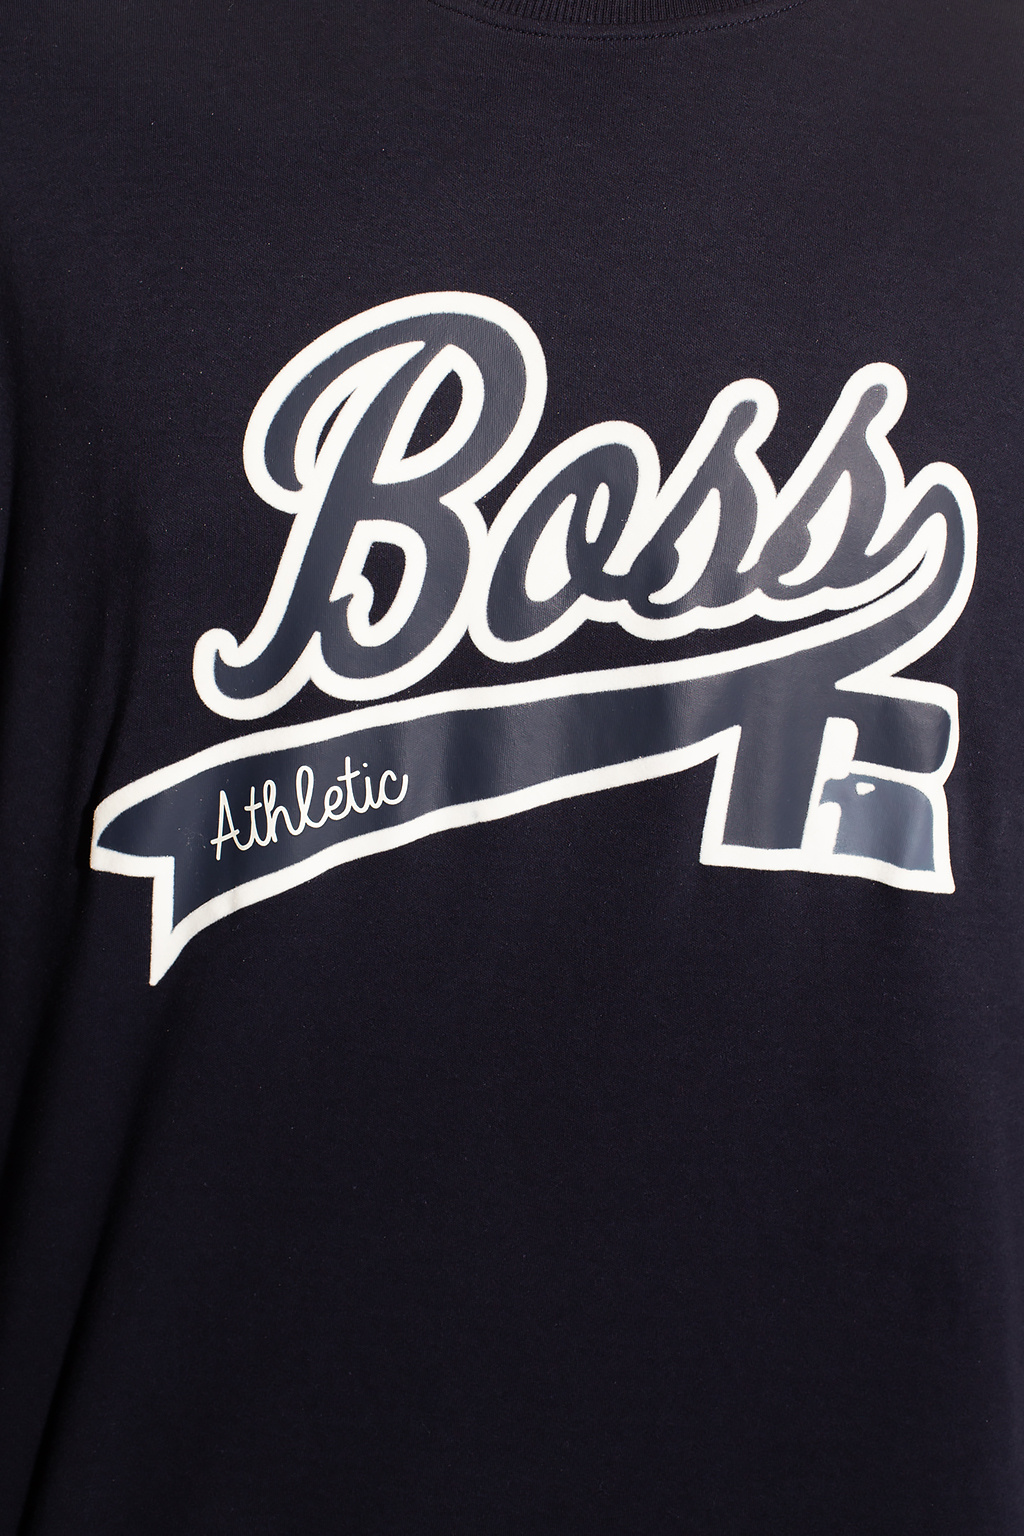 BOSS x Russell Athletic Maisie Wilen Hoodies for Women